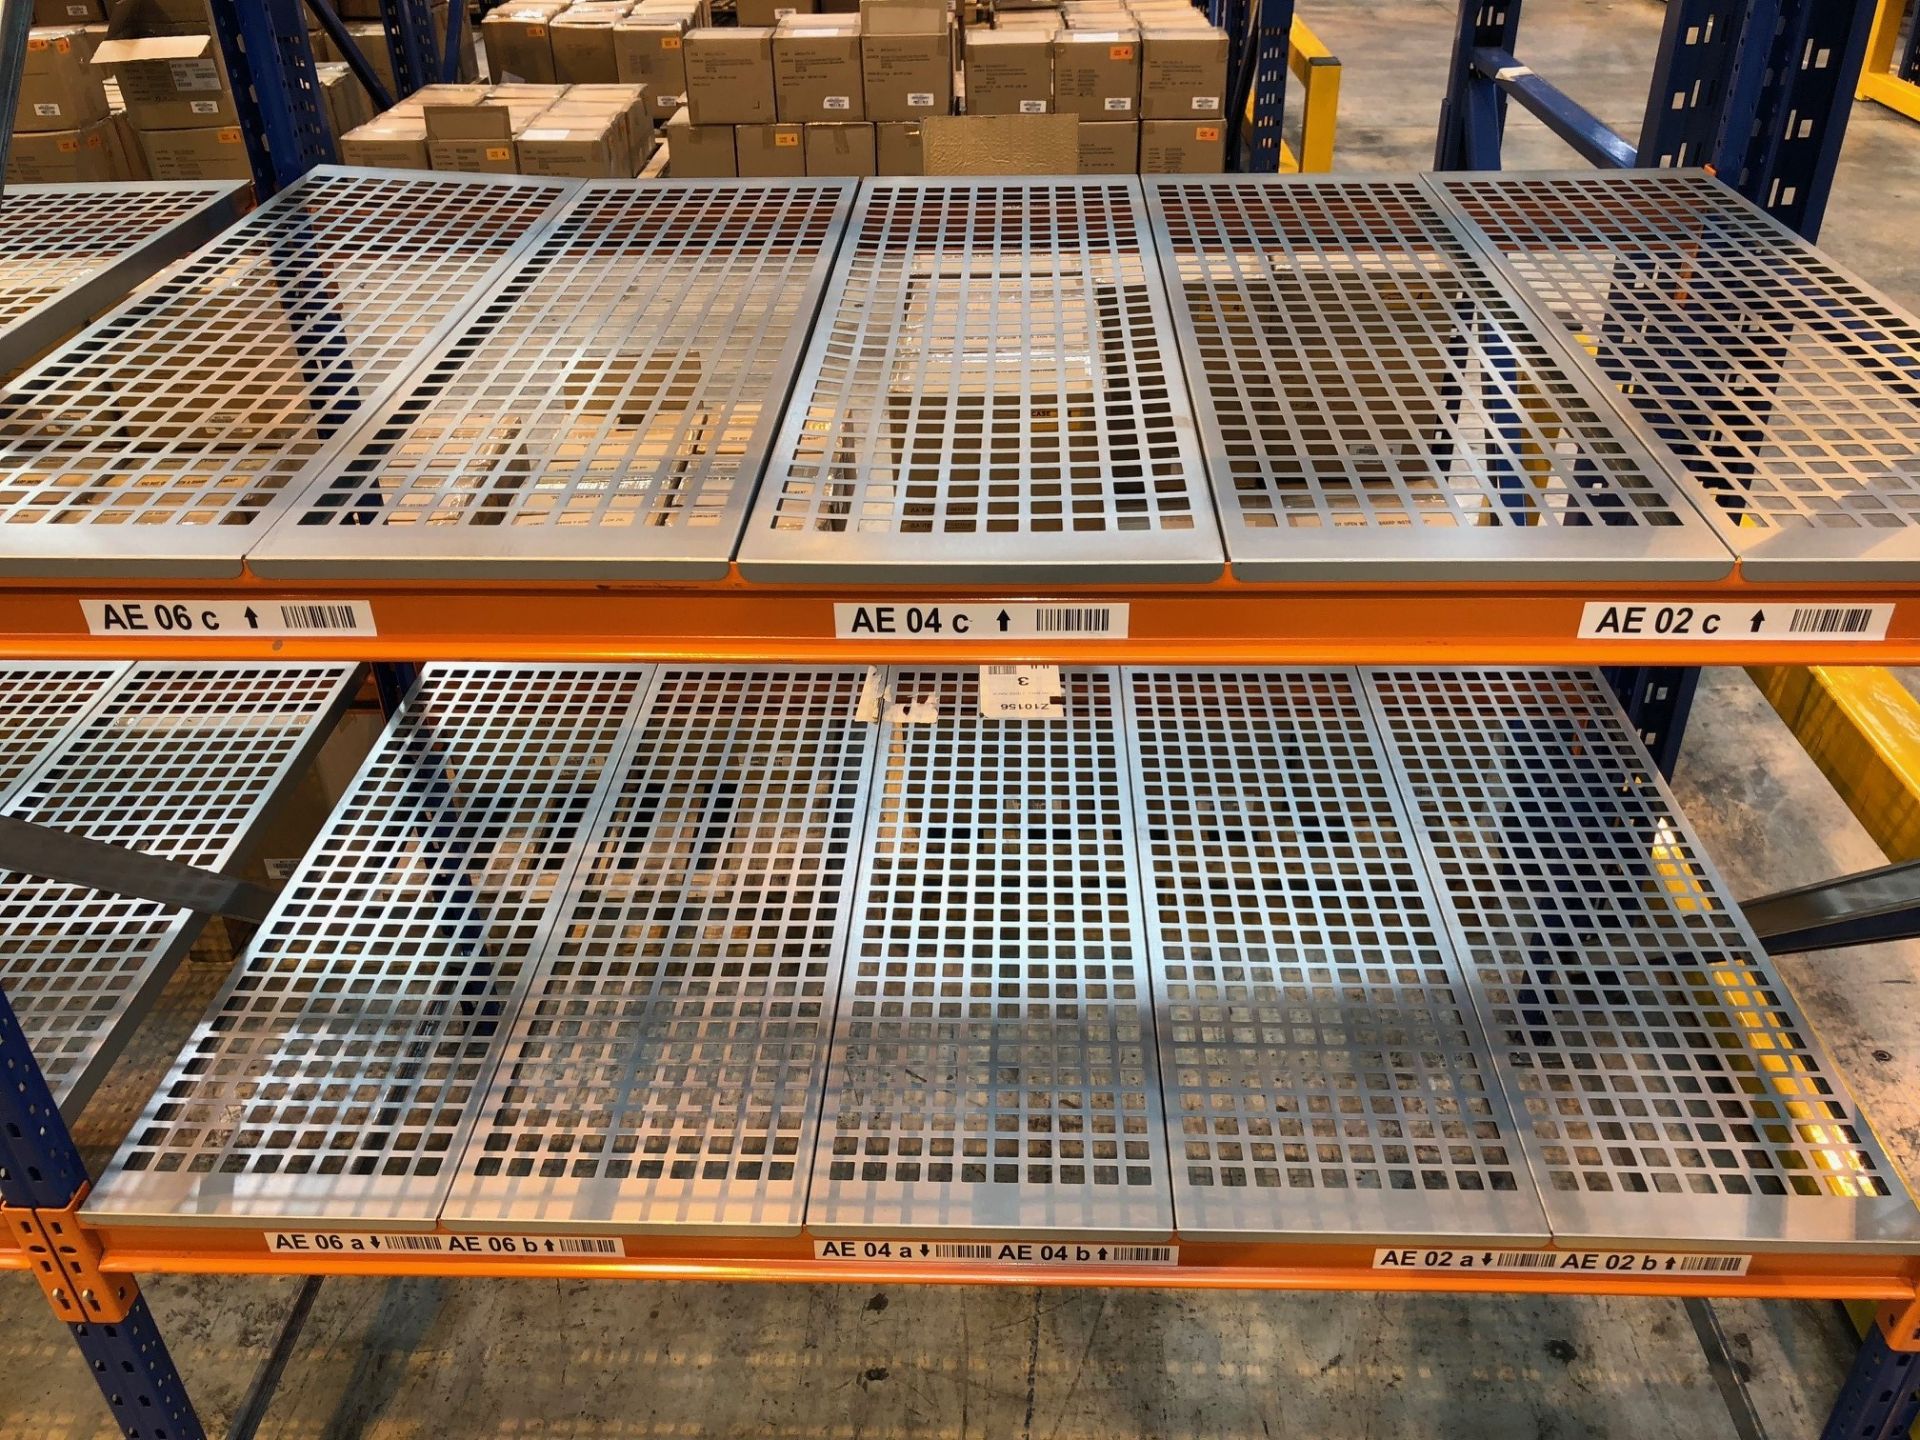 2 x Bays of Small Warehouse Racking/Shelving - Excellent Condition (L1500xH2000xD900mm - 3 x - Image 4 of 4